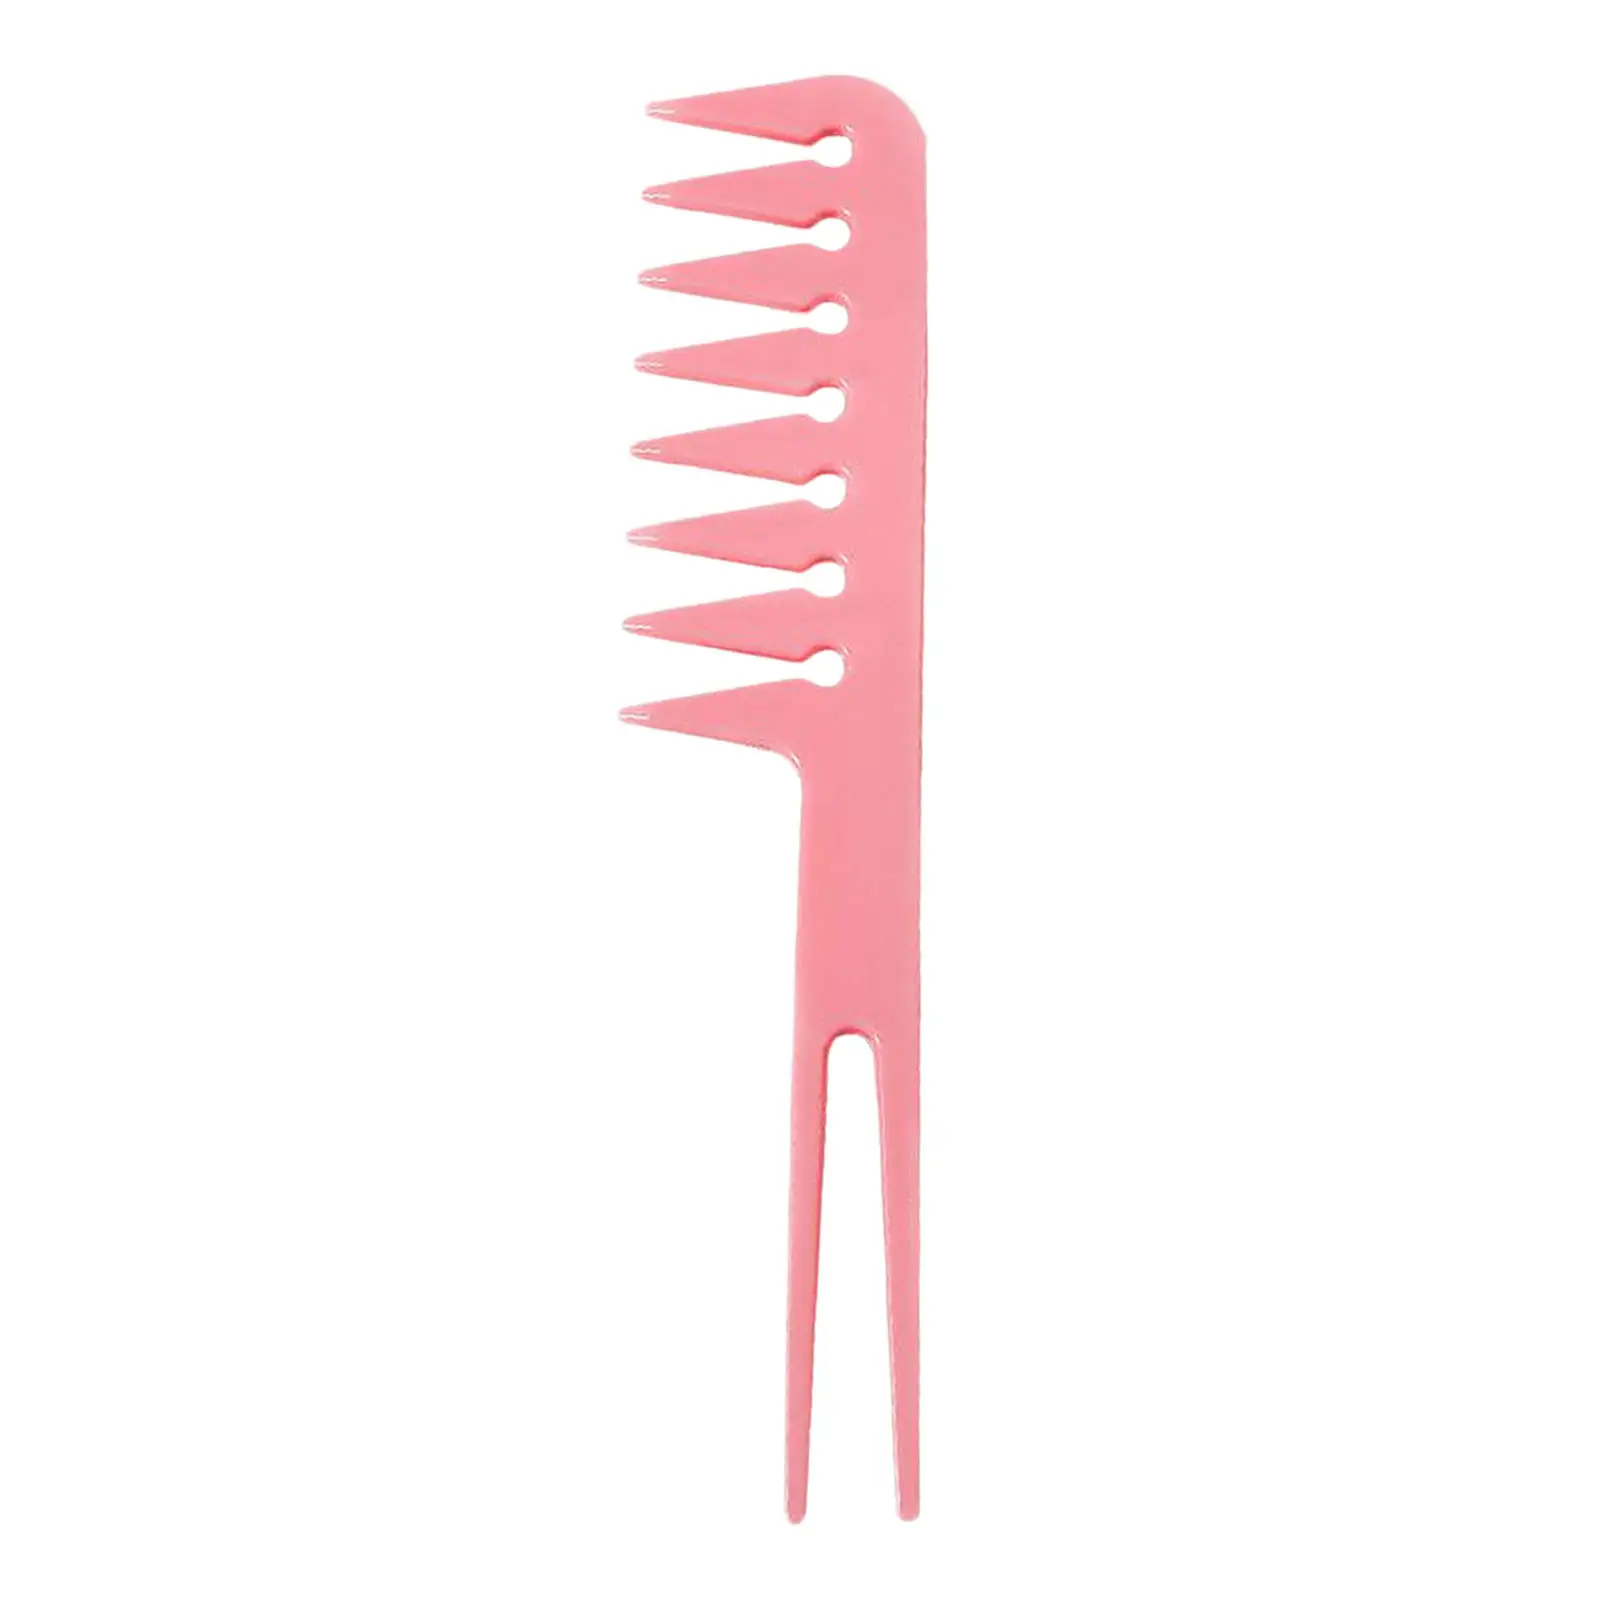 Anti static Wide Tooth Weaving & Sectioning Foiling Comb for Hair Coloring, Highlighting, Balayage, Microbraiding & More